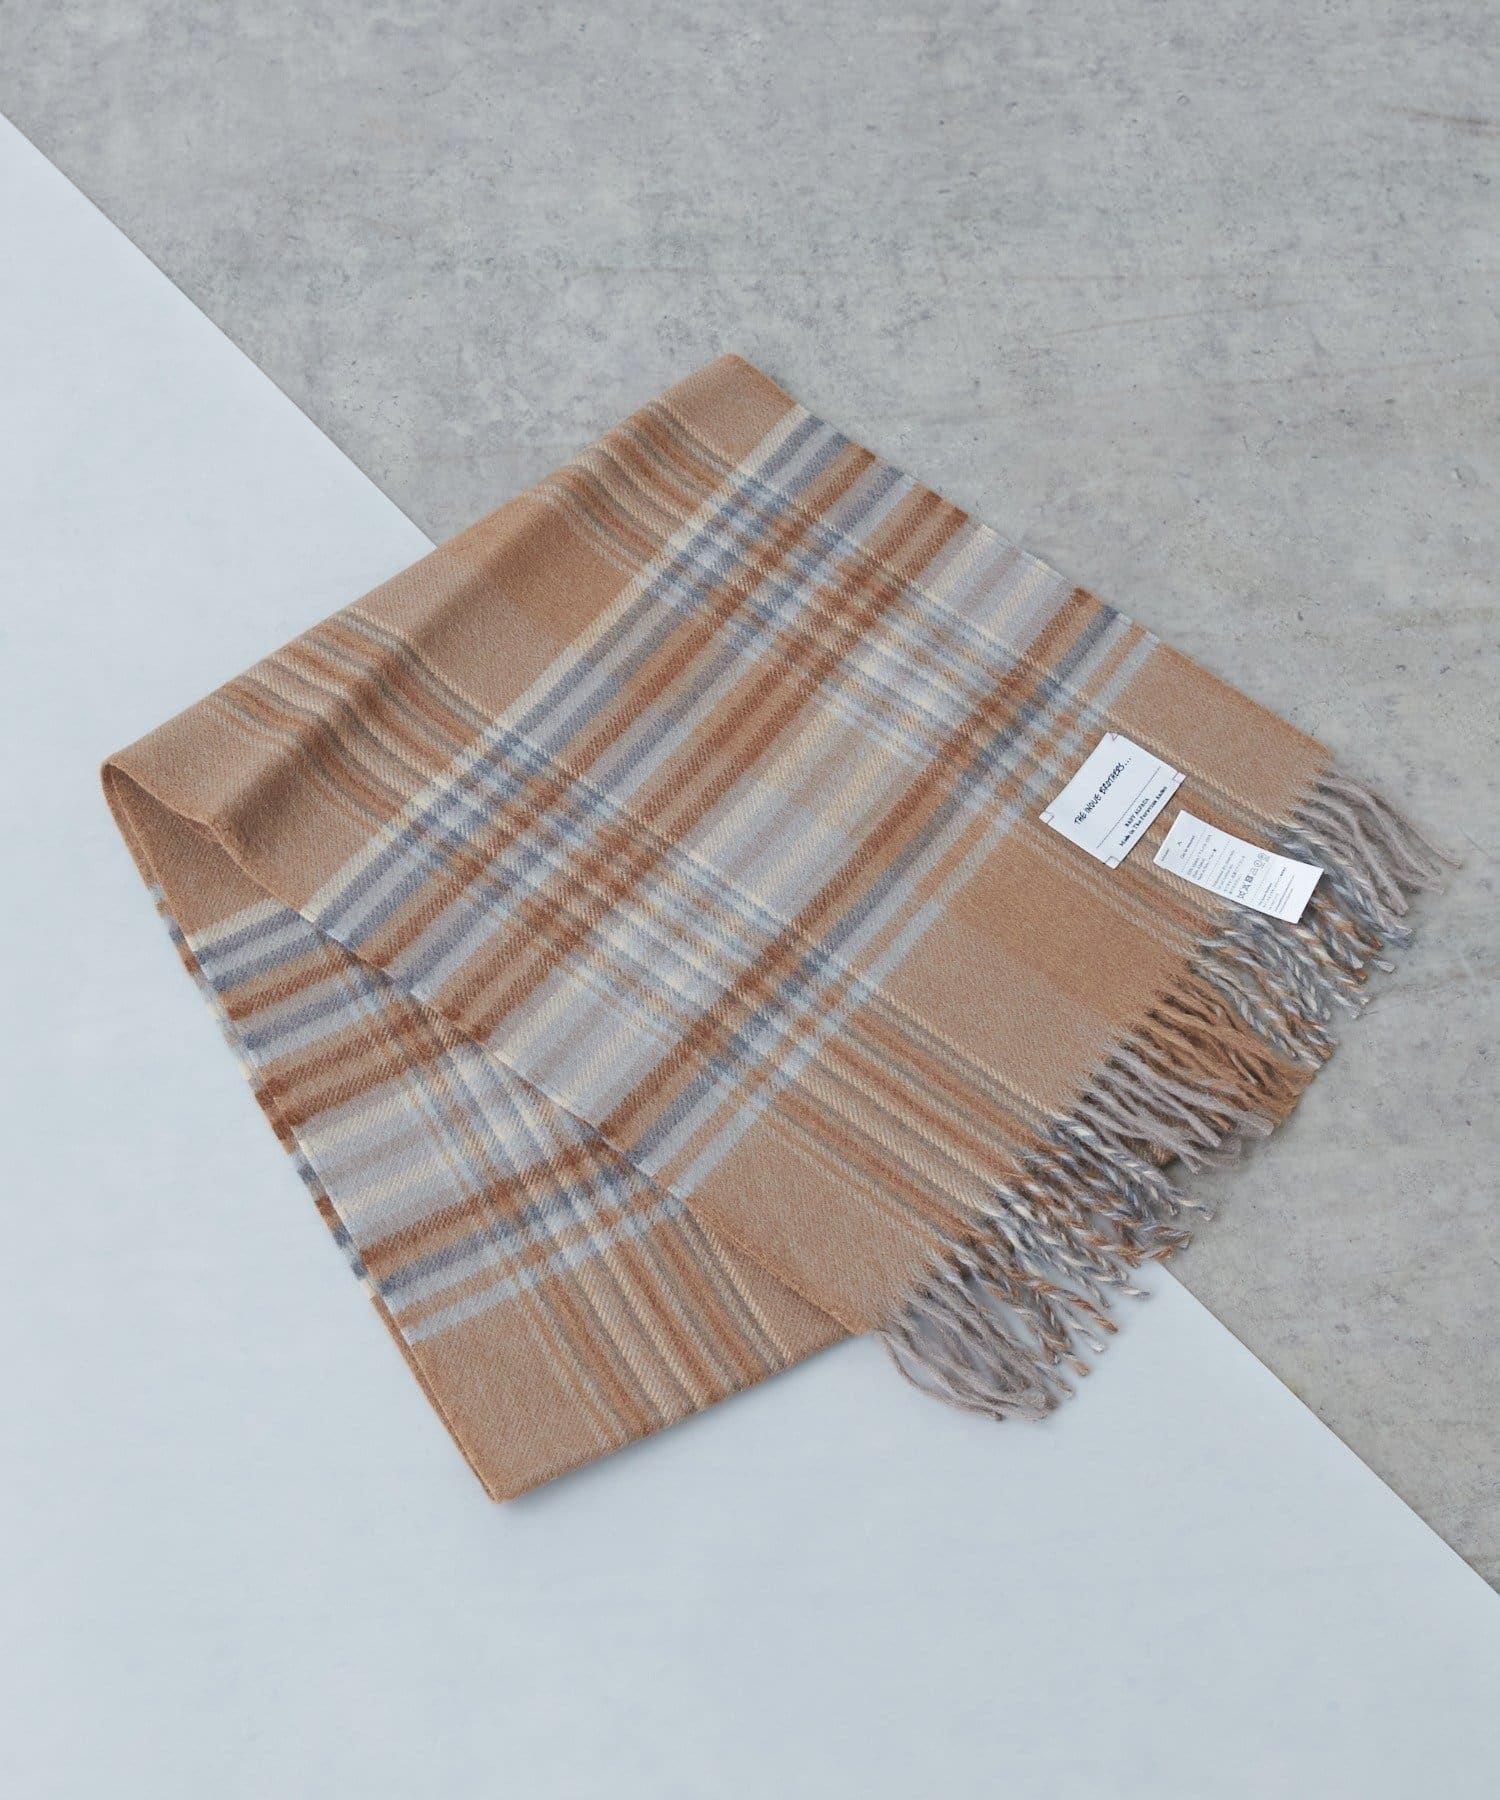 Lui's(ルイス) 【THE INOUE BROTHERS】Brushed Scarf Check